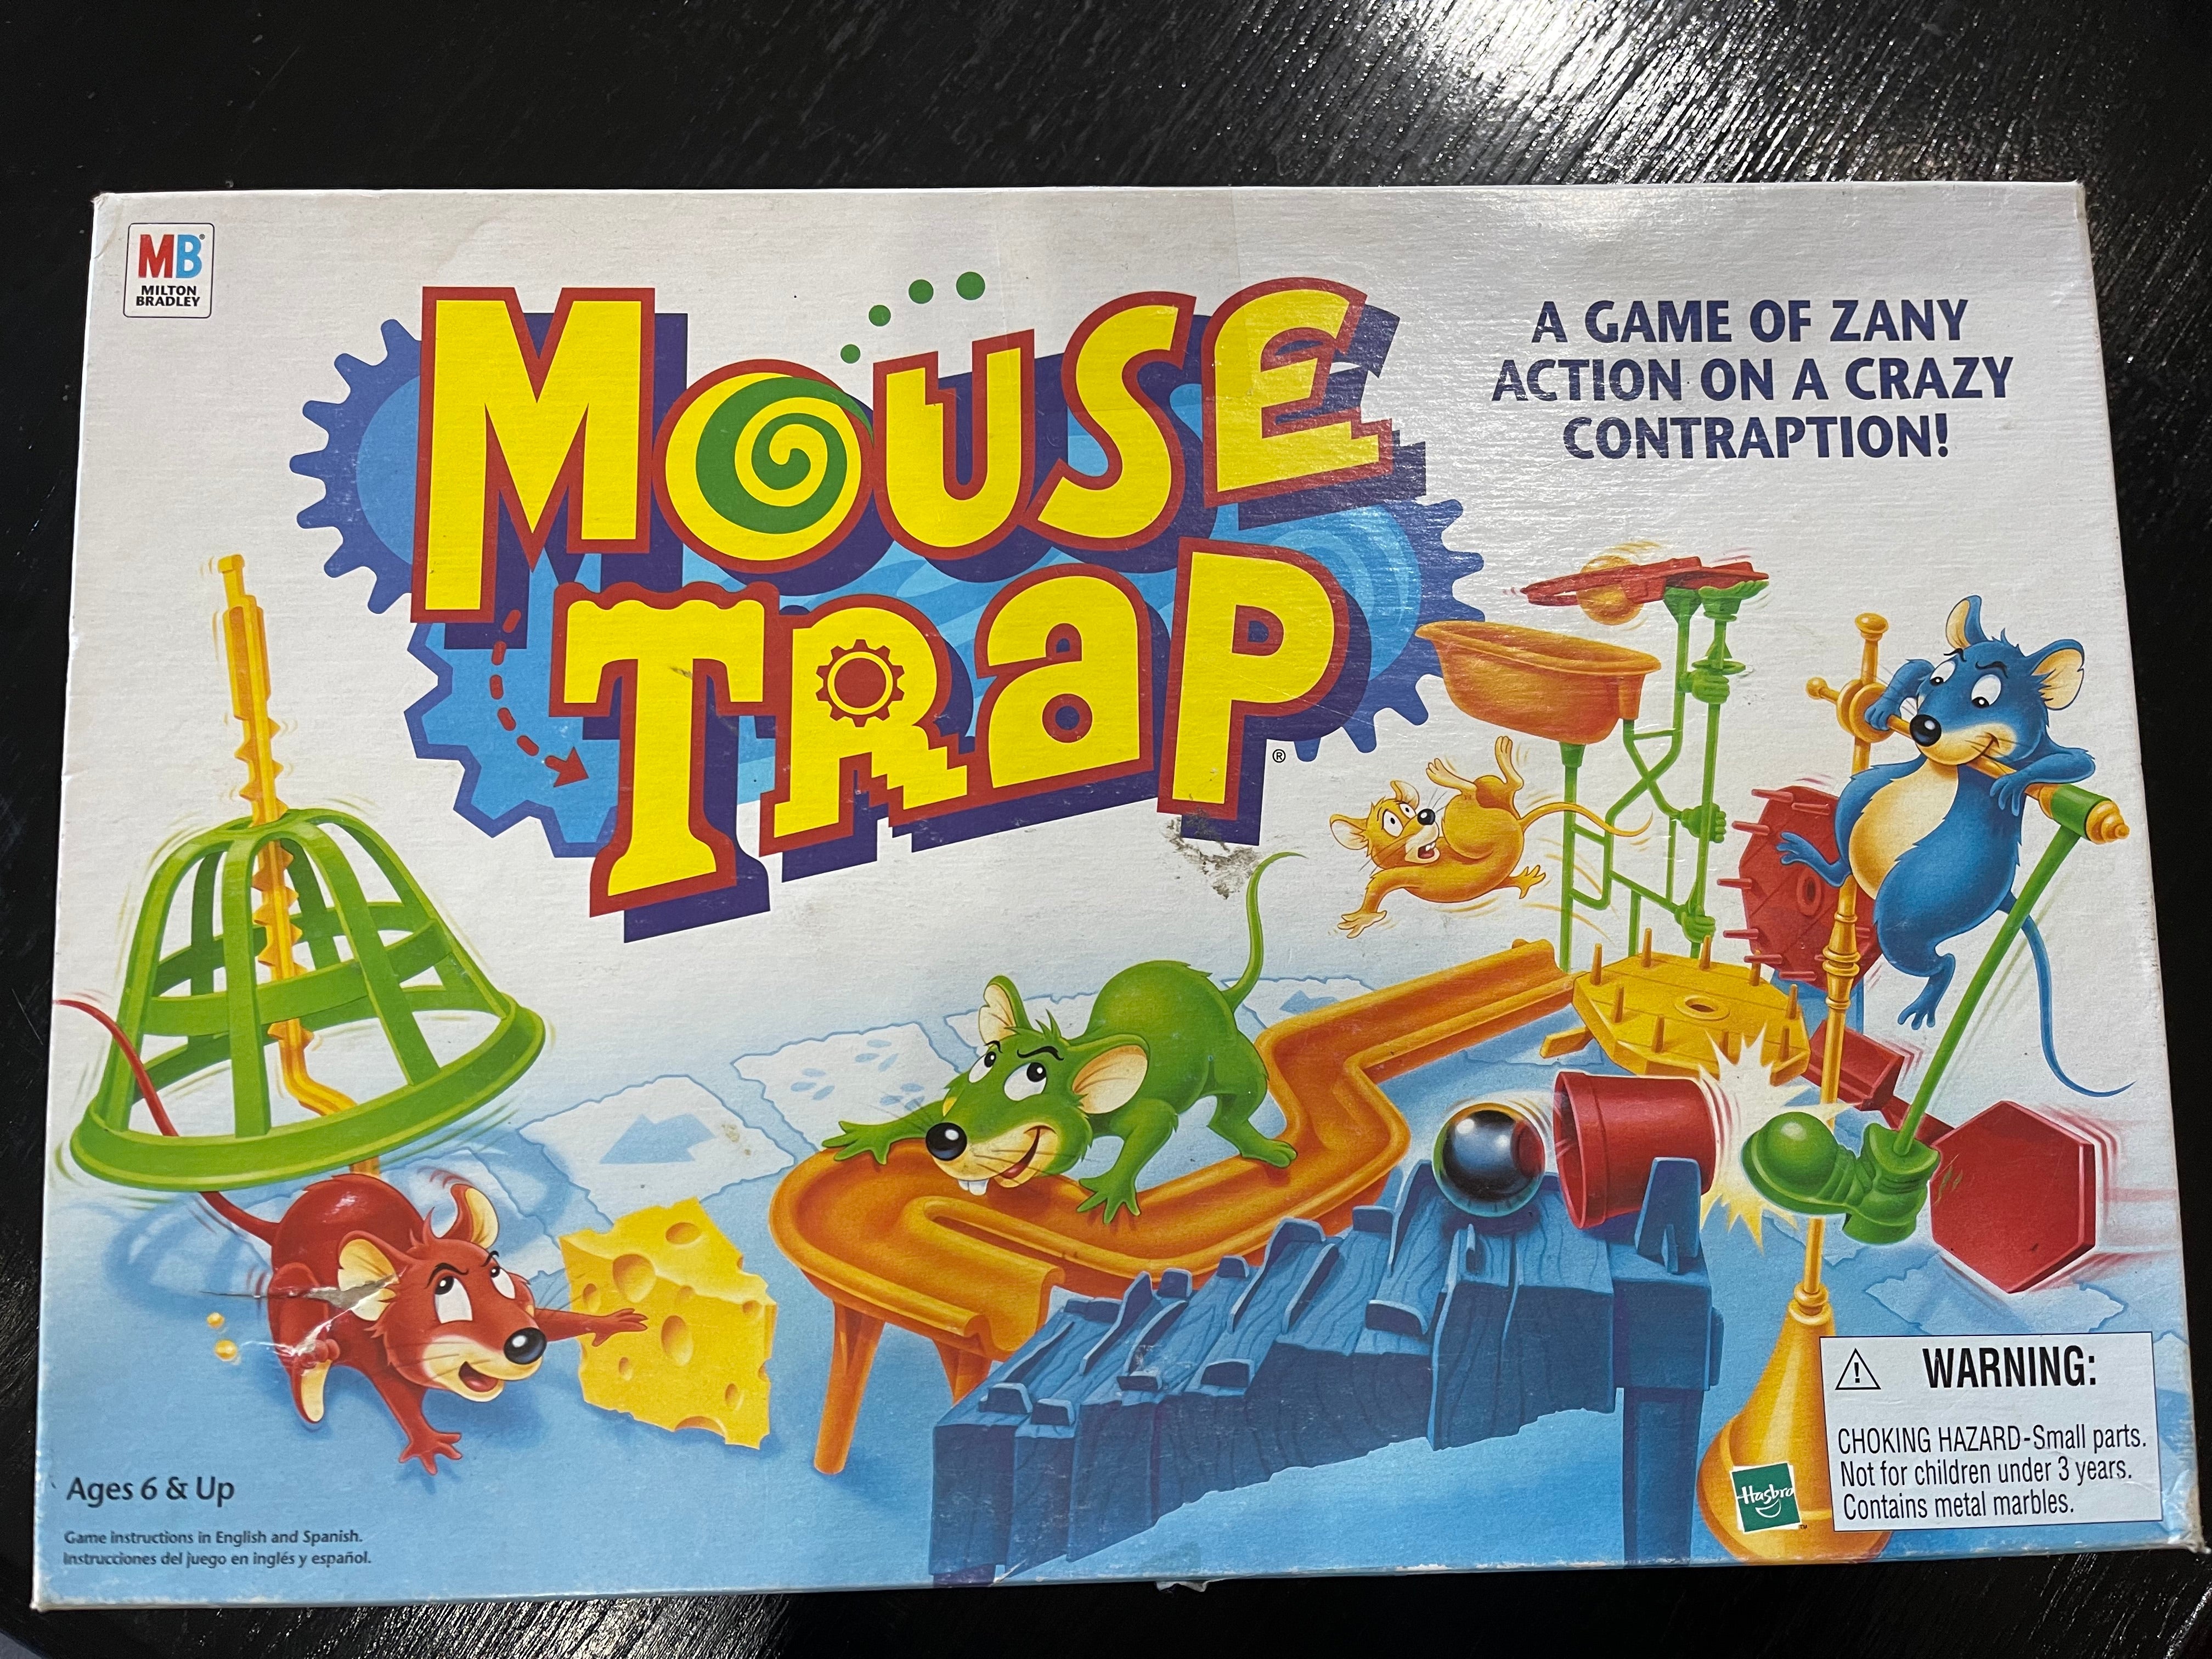  Mouse Trap Board Game 1999 Edition by Milton Bradley